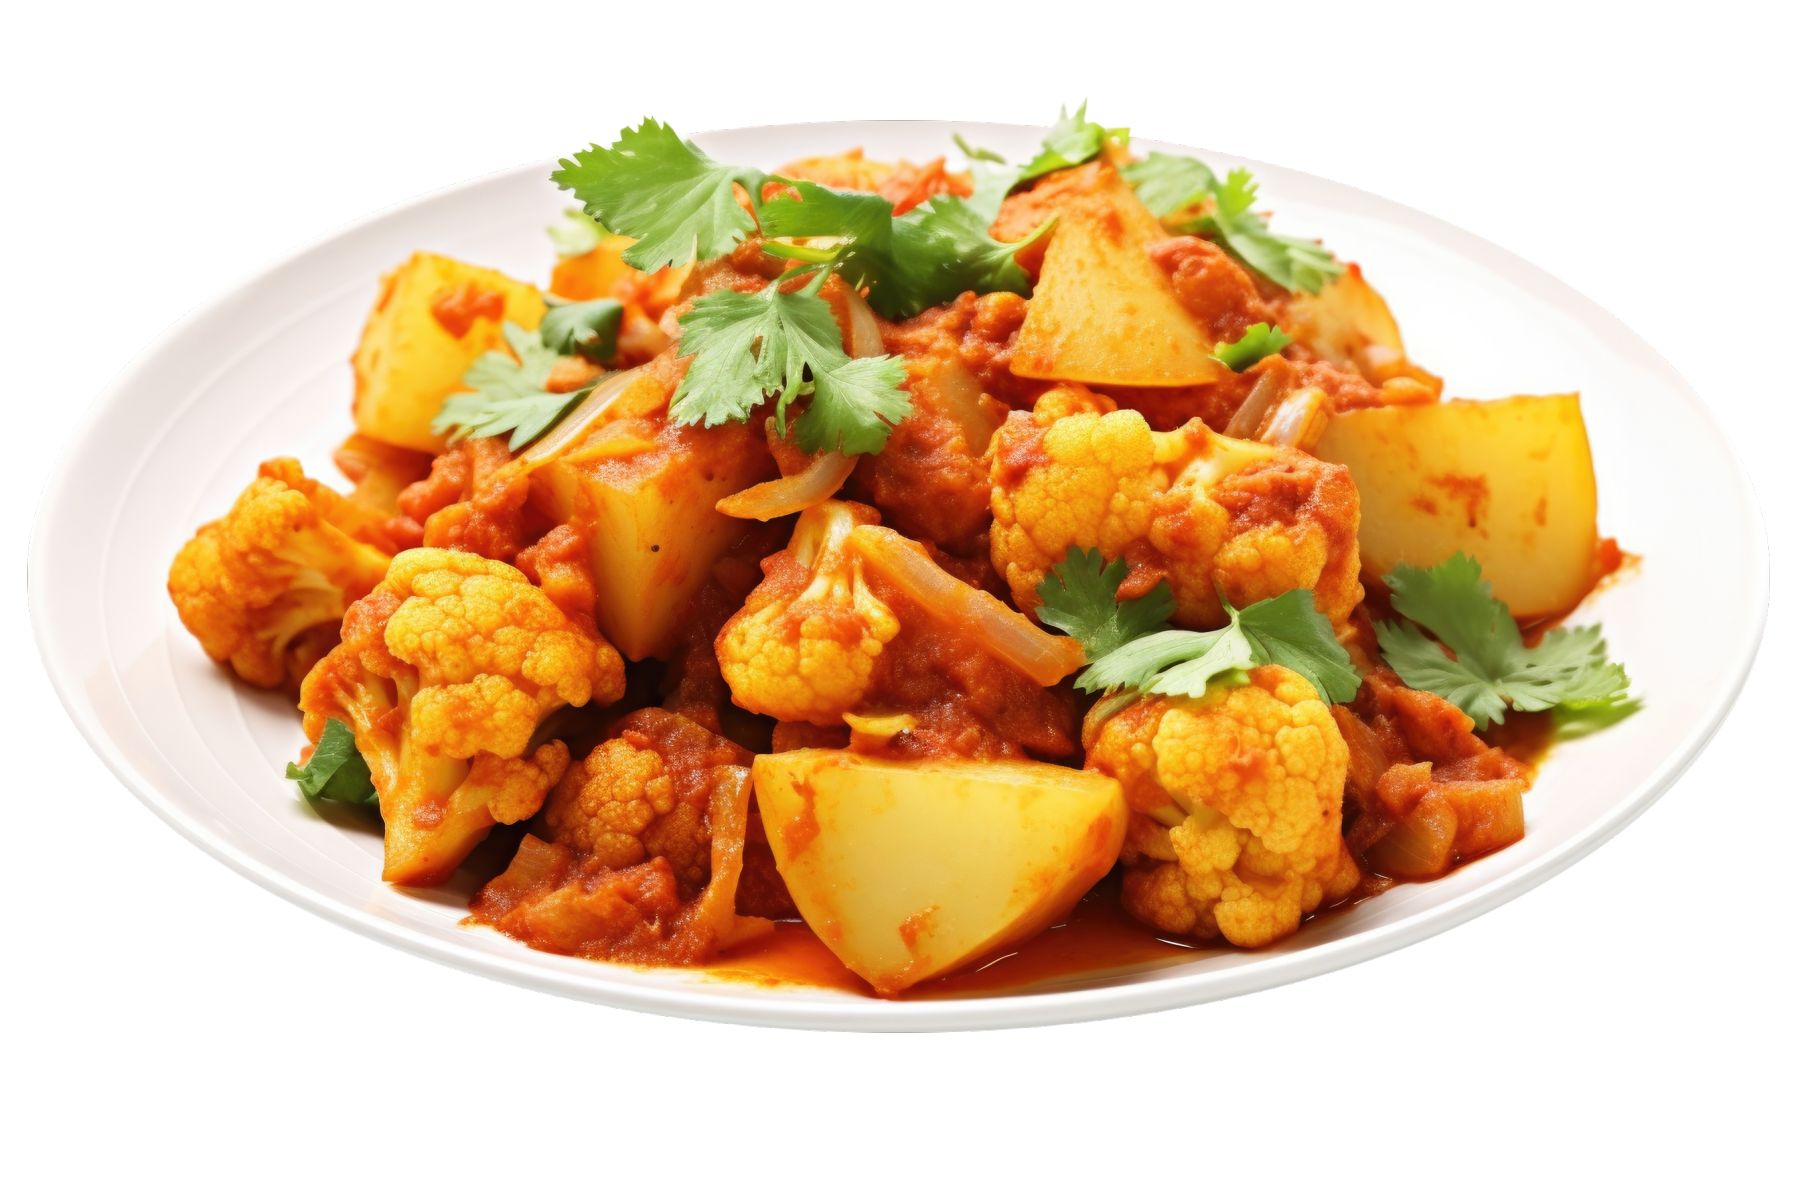 Raj's Corner - Aloo gobhi - traditional Indian dish with potatoes and cauliflower, served as a popular vegetarian delicacy